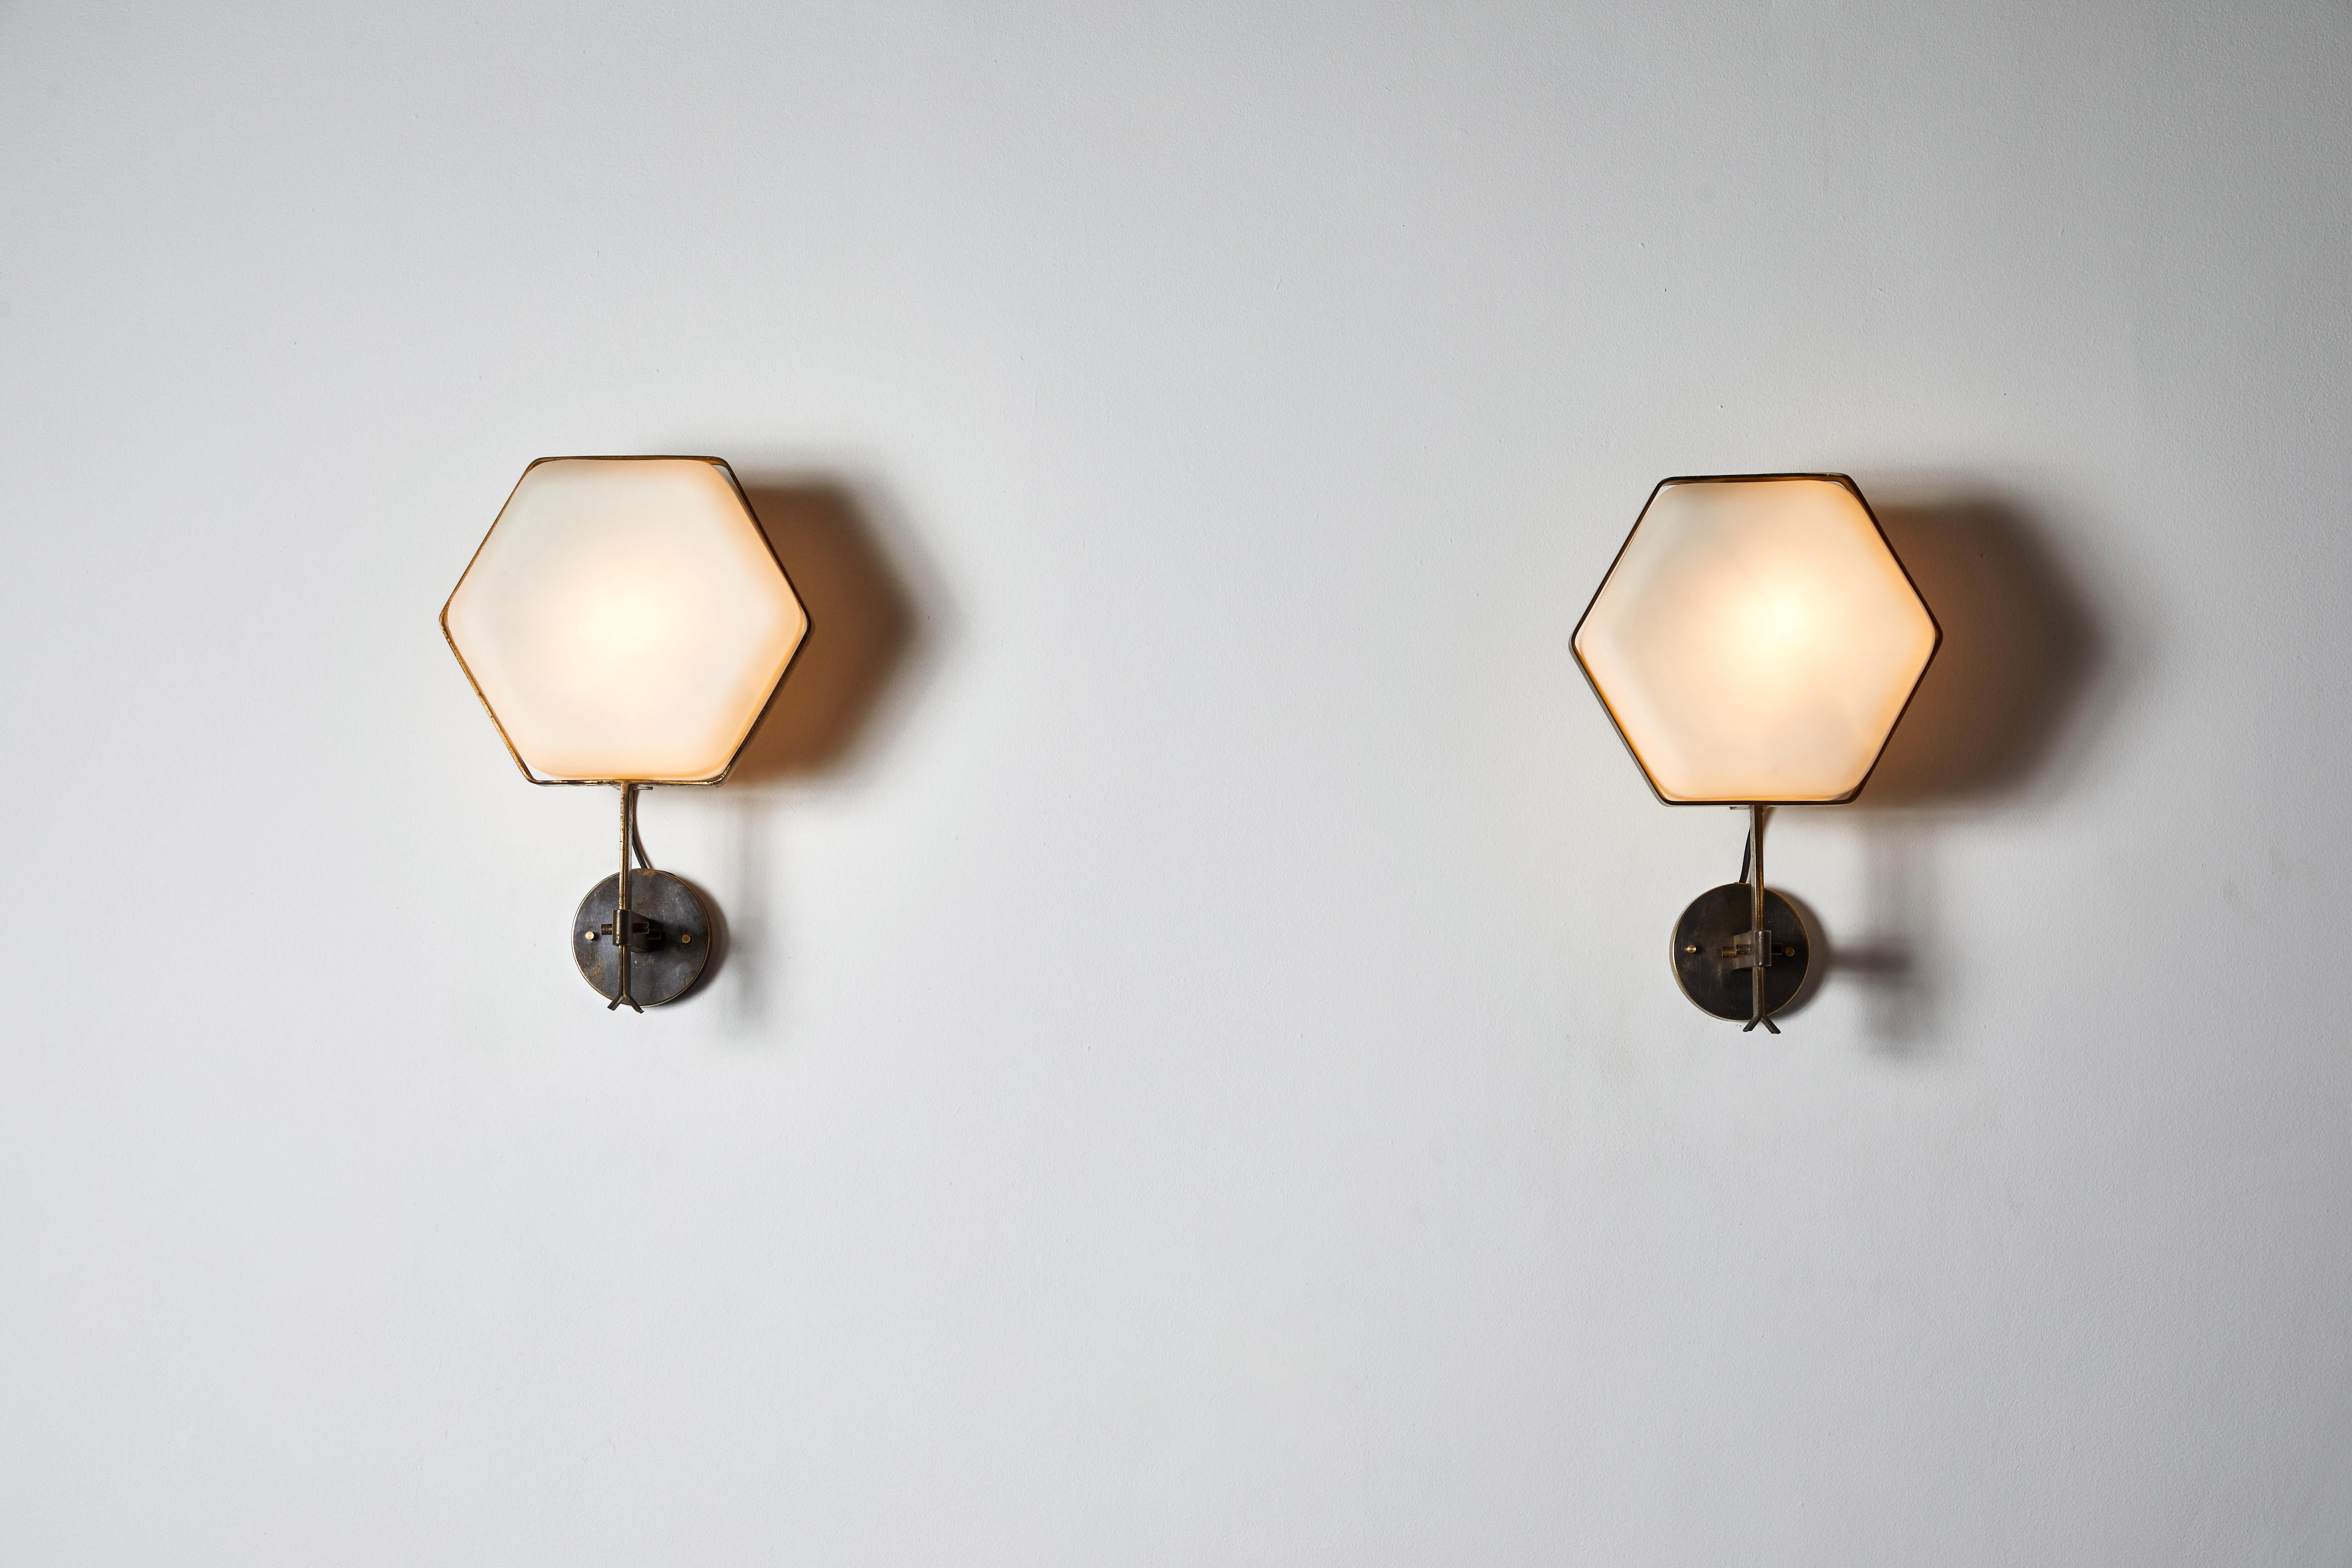 Rare pair of hexagonal sconces by Stilnovo. Manufactured in Italy, circa 1950s. Brushed satin glass diffusers, brass. Rewired for U.S. standards. We recommend one E27 60w maximum bulb per light. Bulbs provided as a one time courtesy.